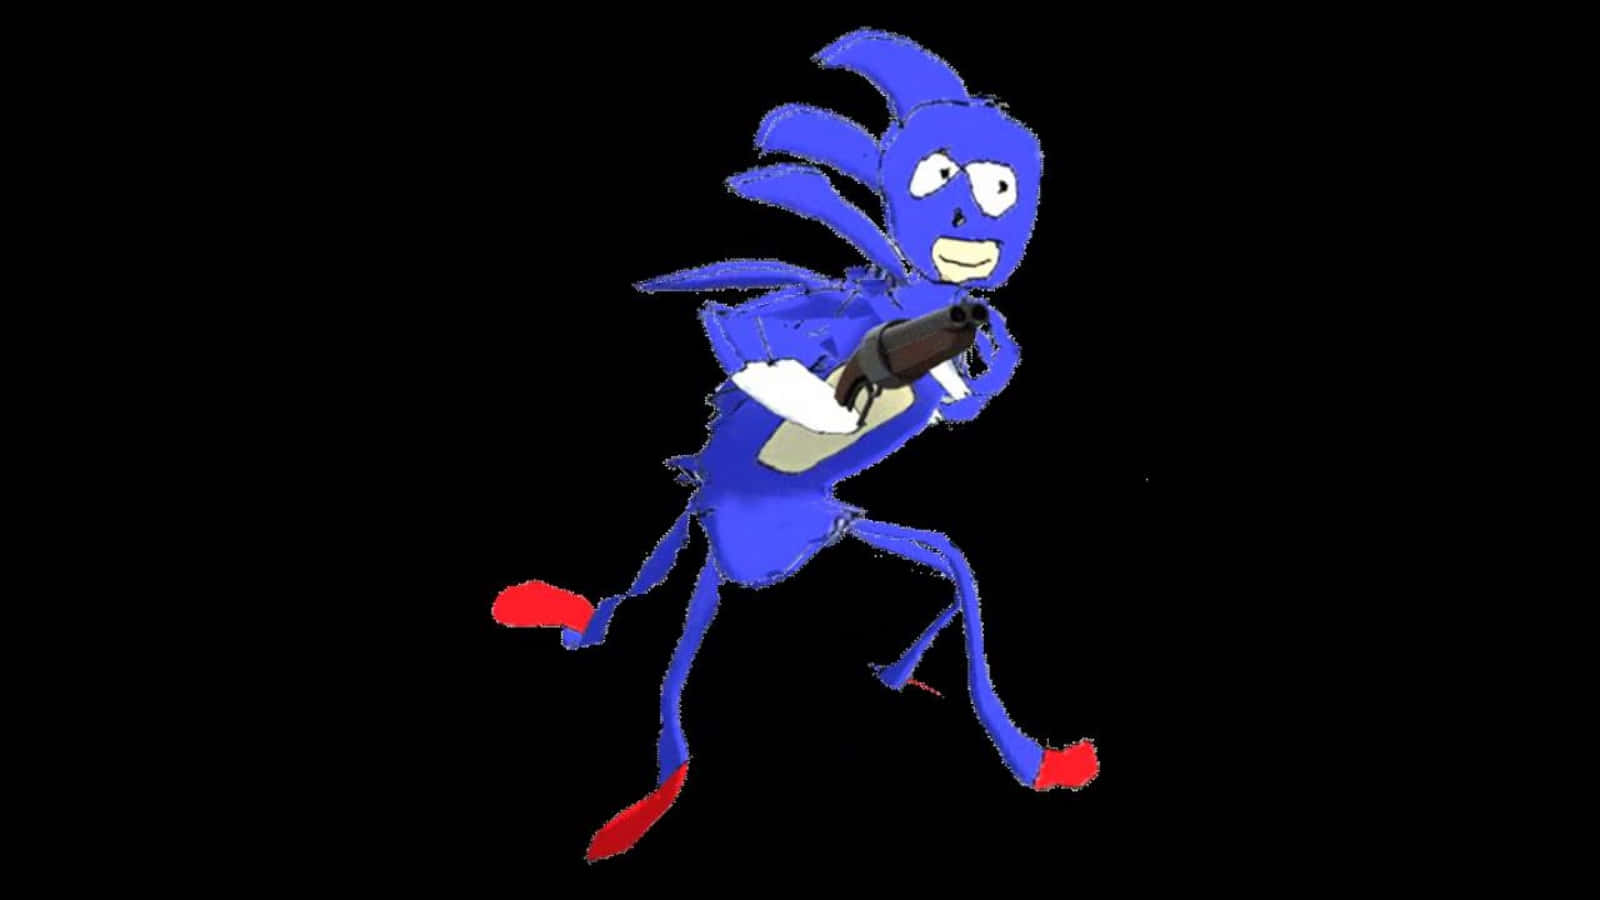 Sanic, The Speedy Blue Hedgehog In An Action Pose.